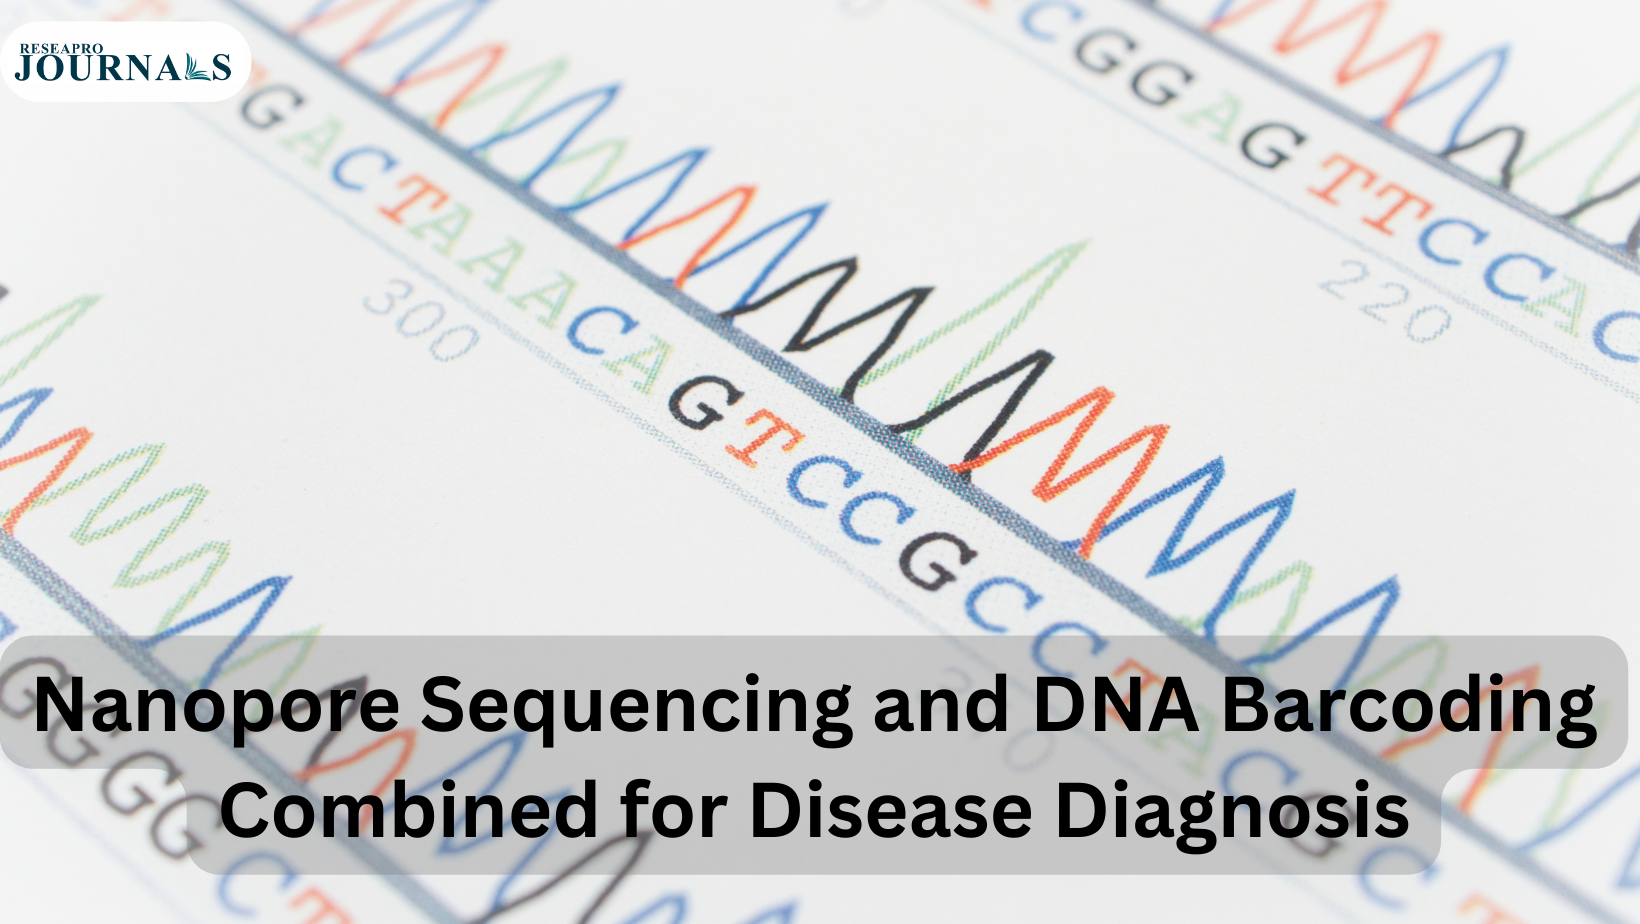 Nanopore Sequencing and DNA Barcoding Combined for Disease Diagnosis